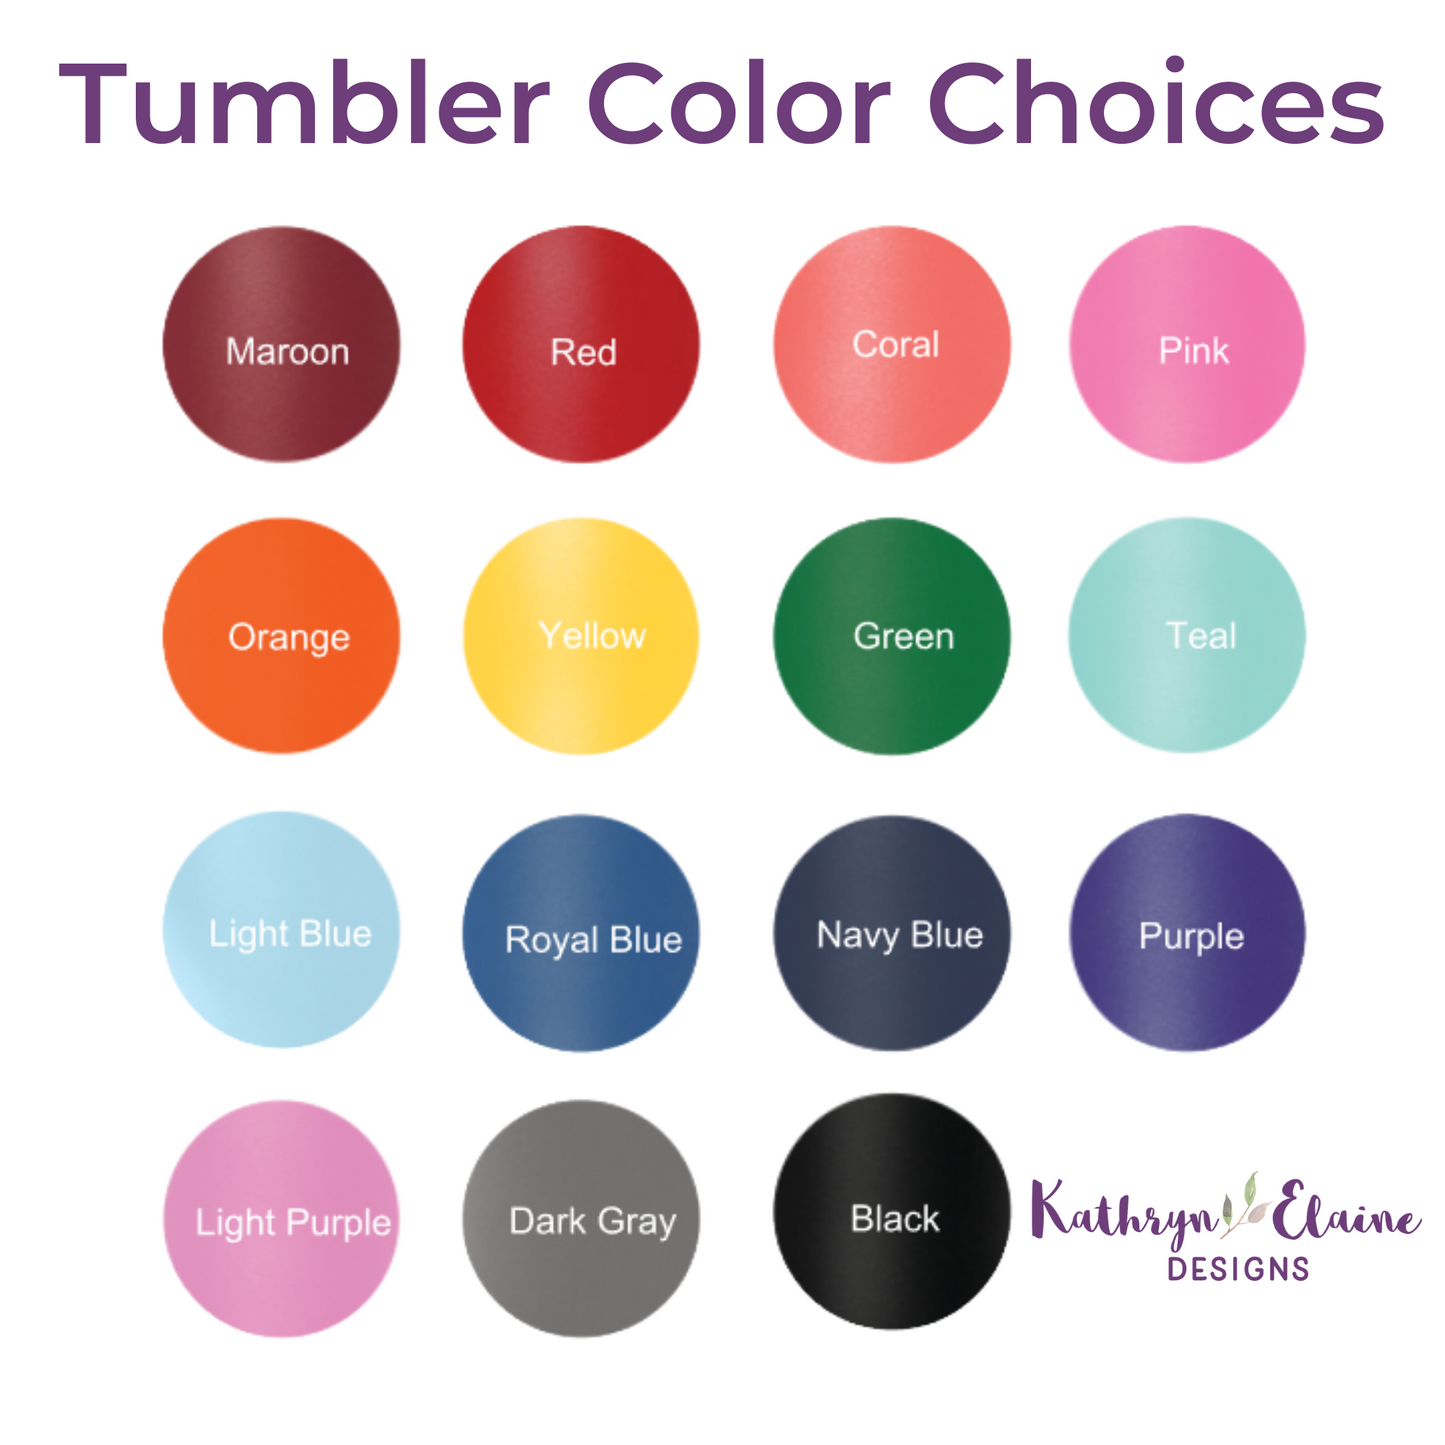 15 different color circles: maroon, red, coral, pink, orange, yellow, green, teal, light blue, royal blue, navy blue, purple, light purple, dark gray, black